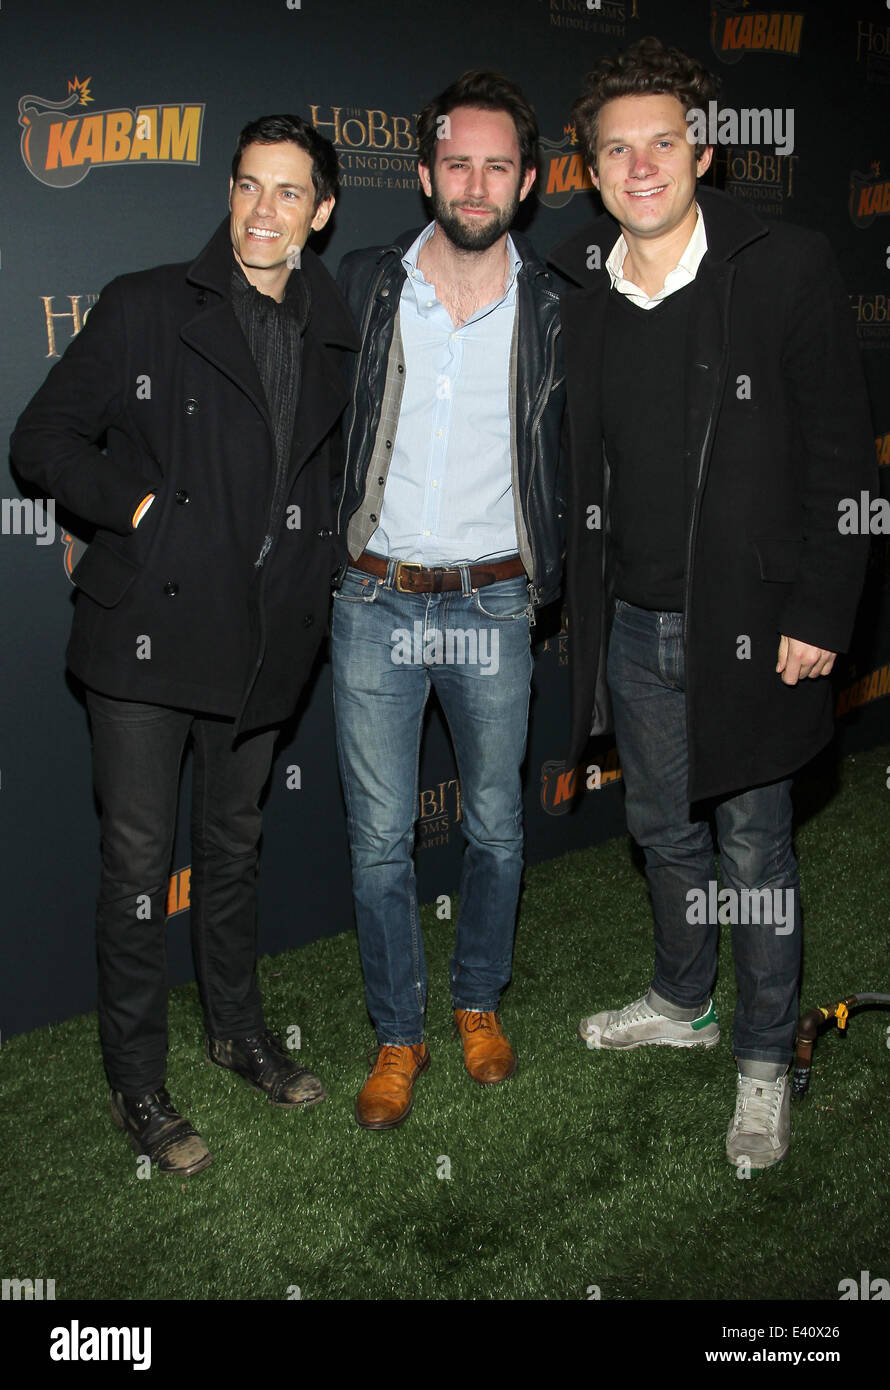 The Hobbit: The Desolation of Smaug Expansion Pack Kabam Mobile Game Launch Party At Eveleigh  Featuring: Drew Murray,Evan Low Stock Photo